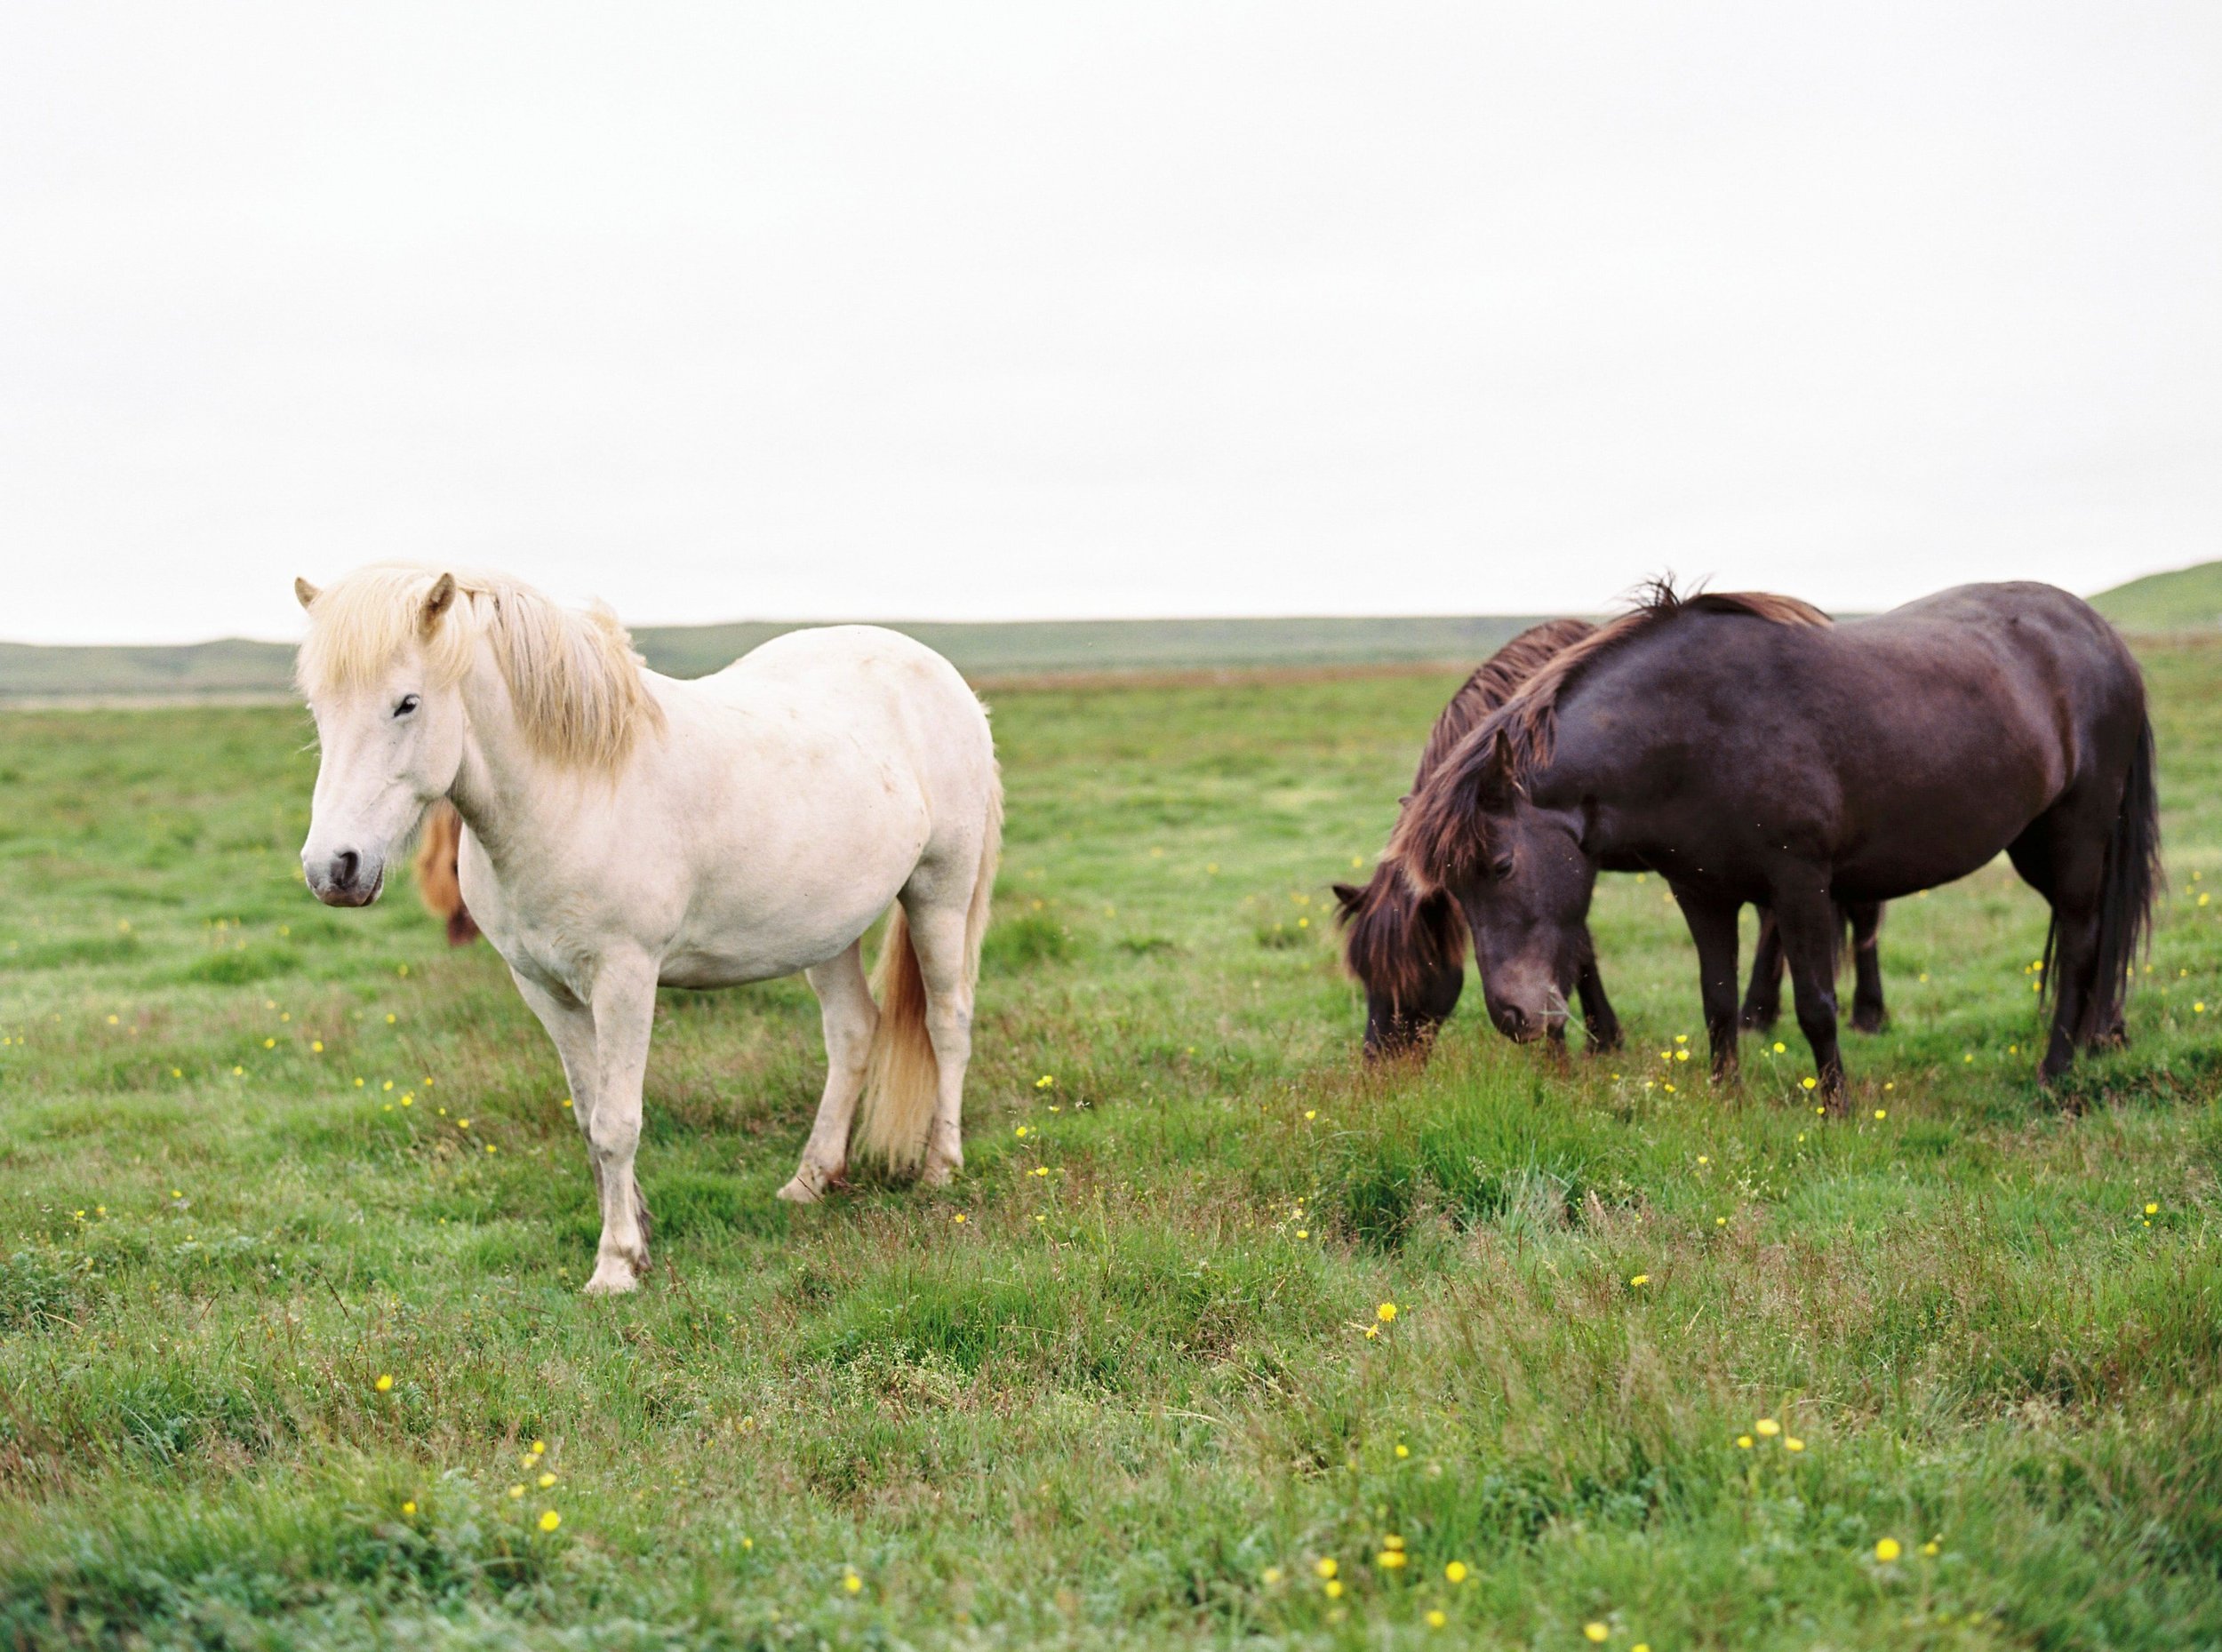 Horses in Iceland by Kristin Sweeting now on Cottage Hill65.jpg